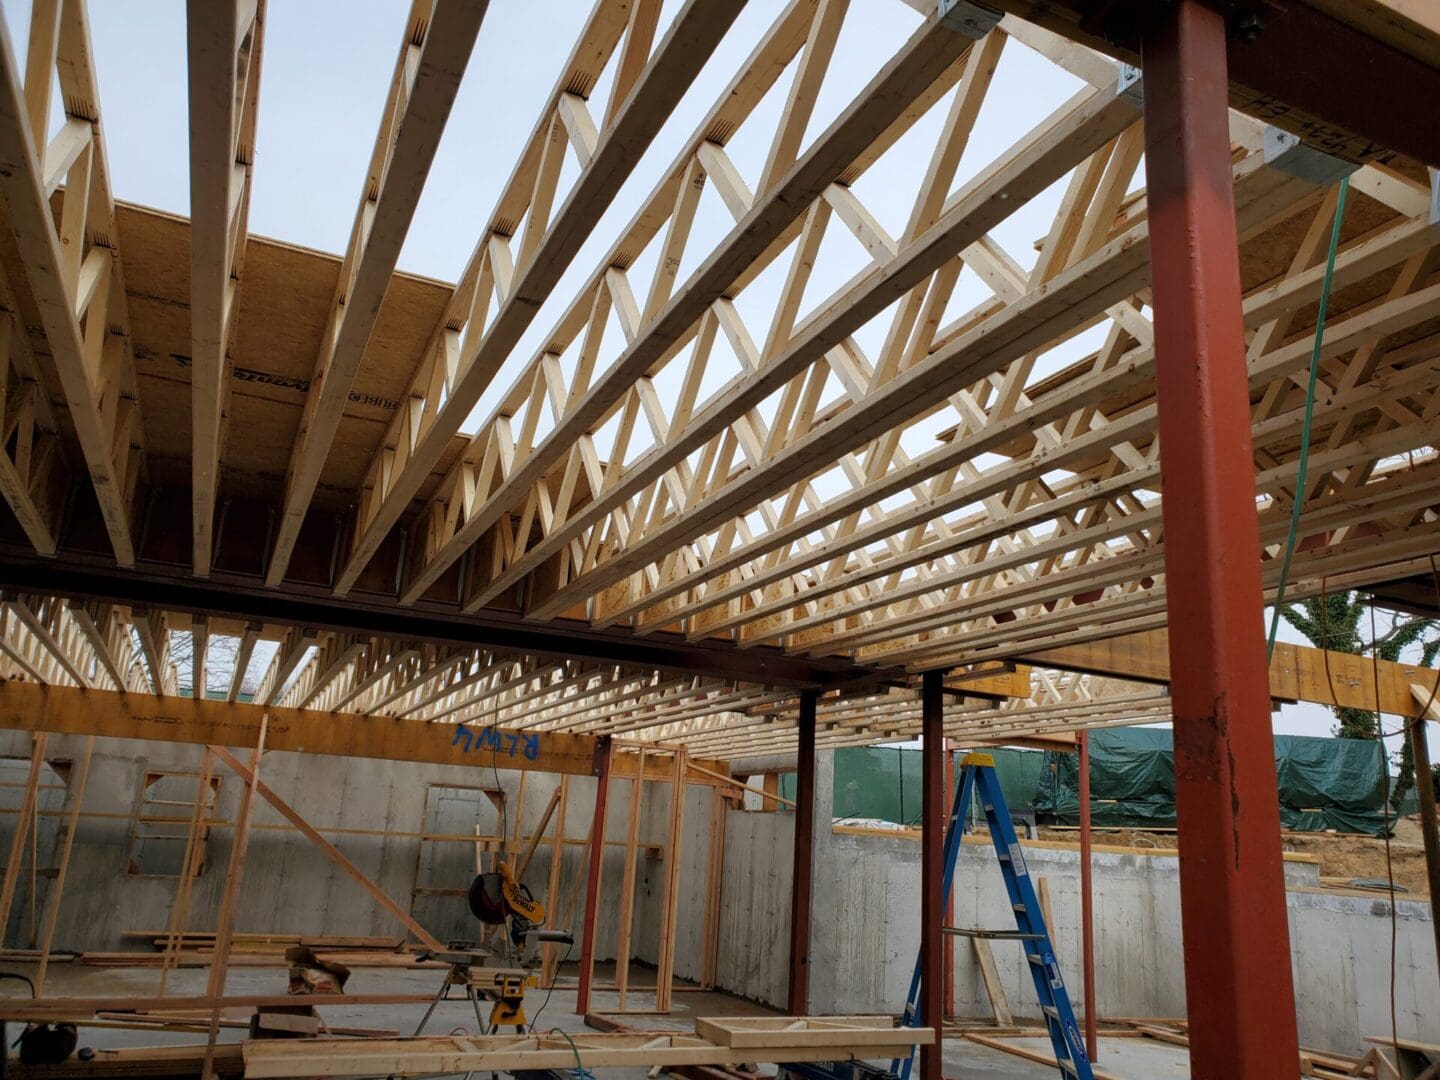 A building under construction with scaffolding and wooden beams.